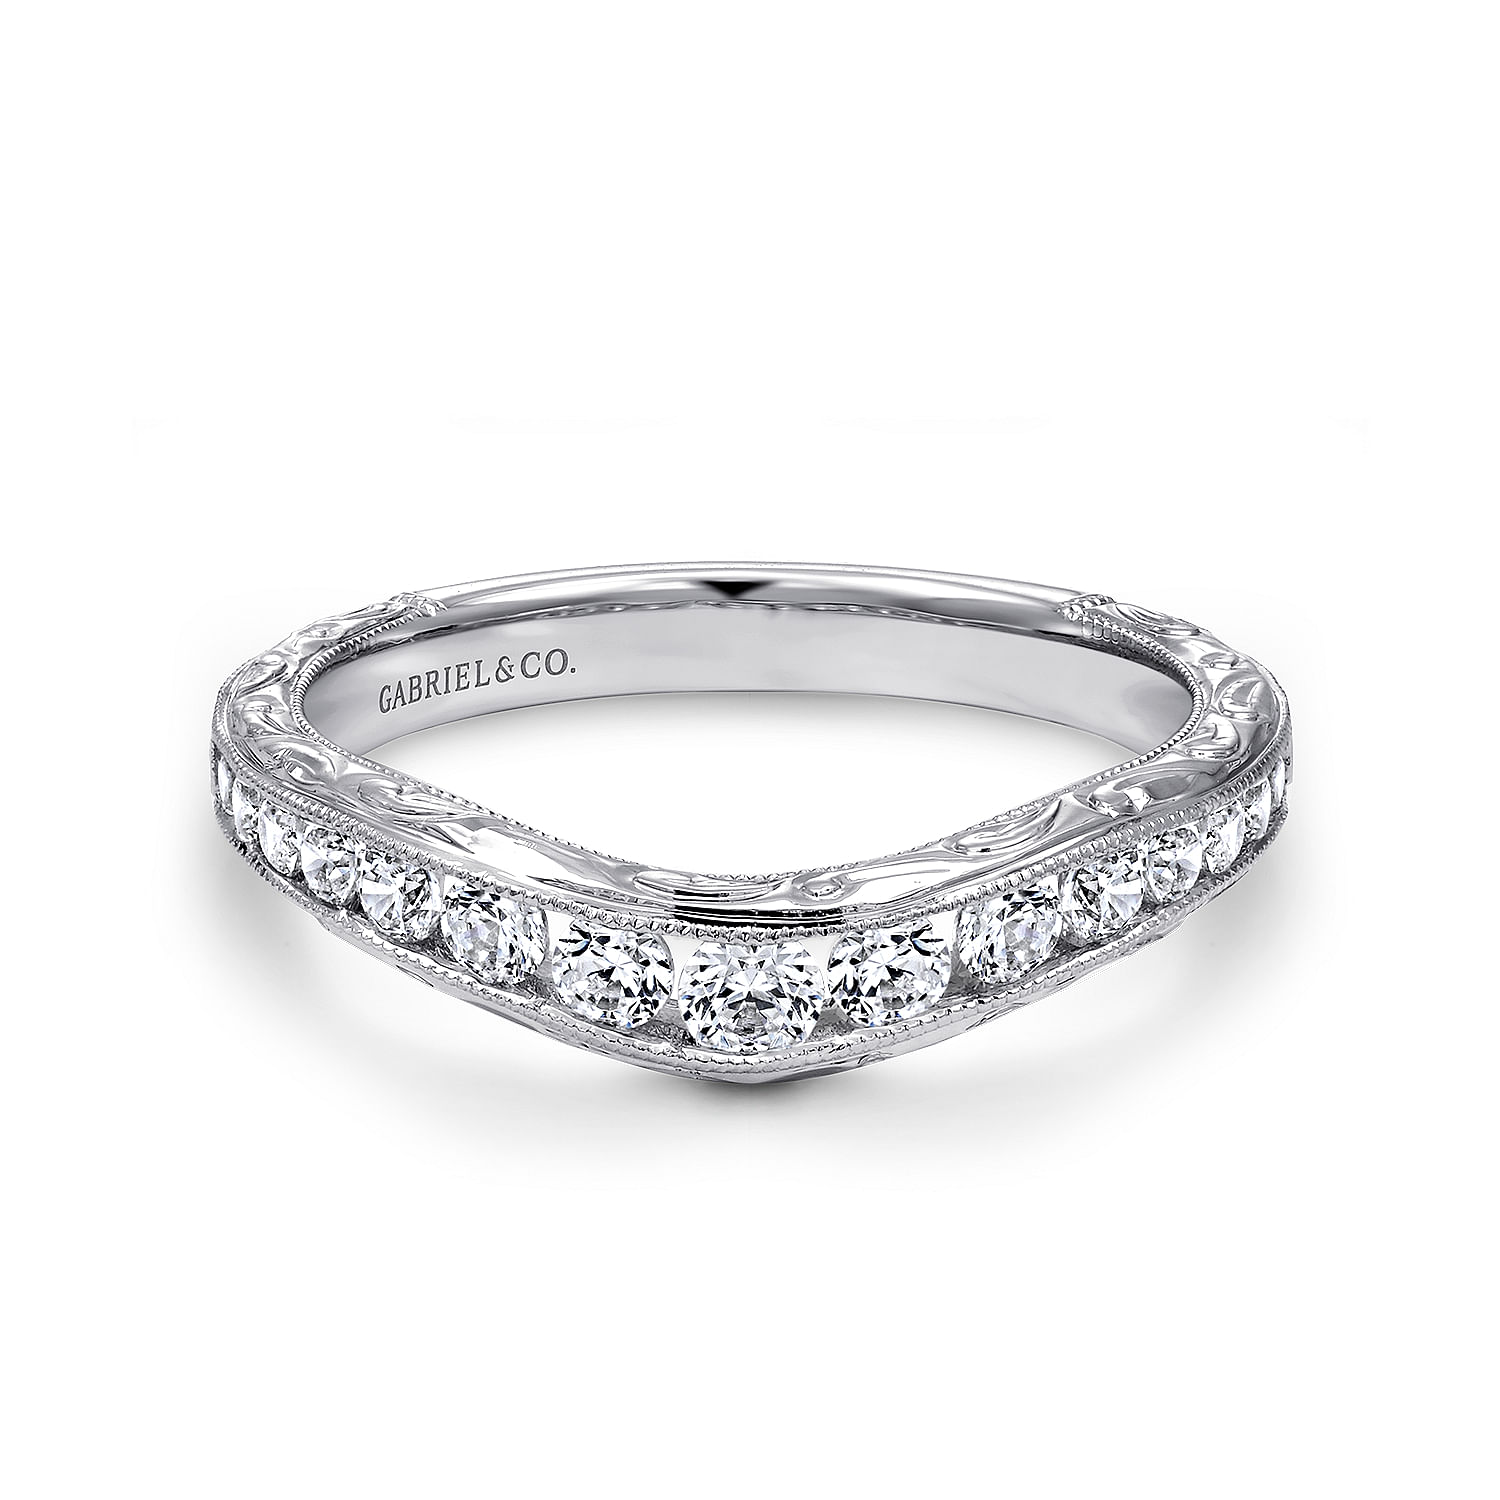 Vintage Inspired 14K White Gold Micro Pavé Curved and Channel Set Diamond Wedding Band with Engraving